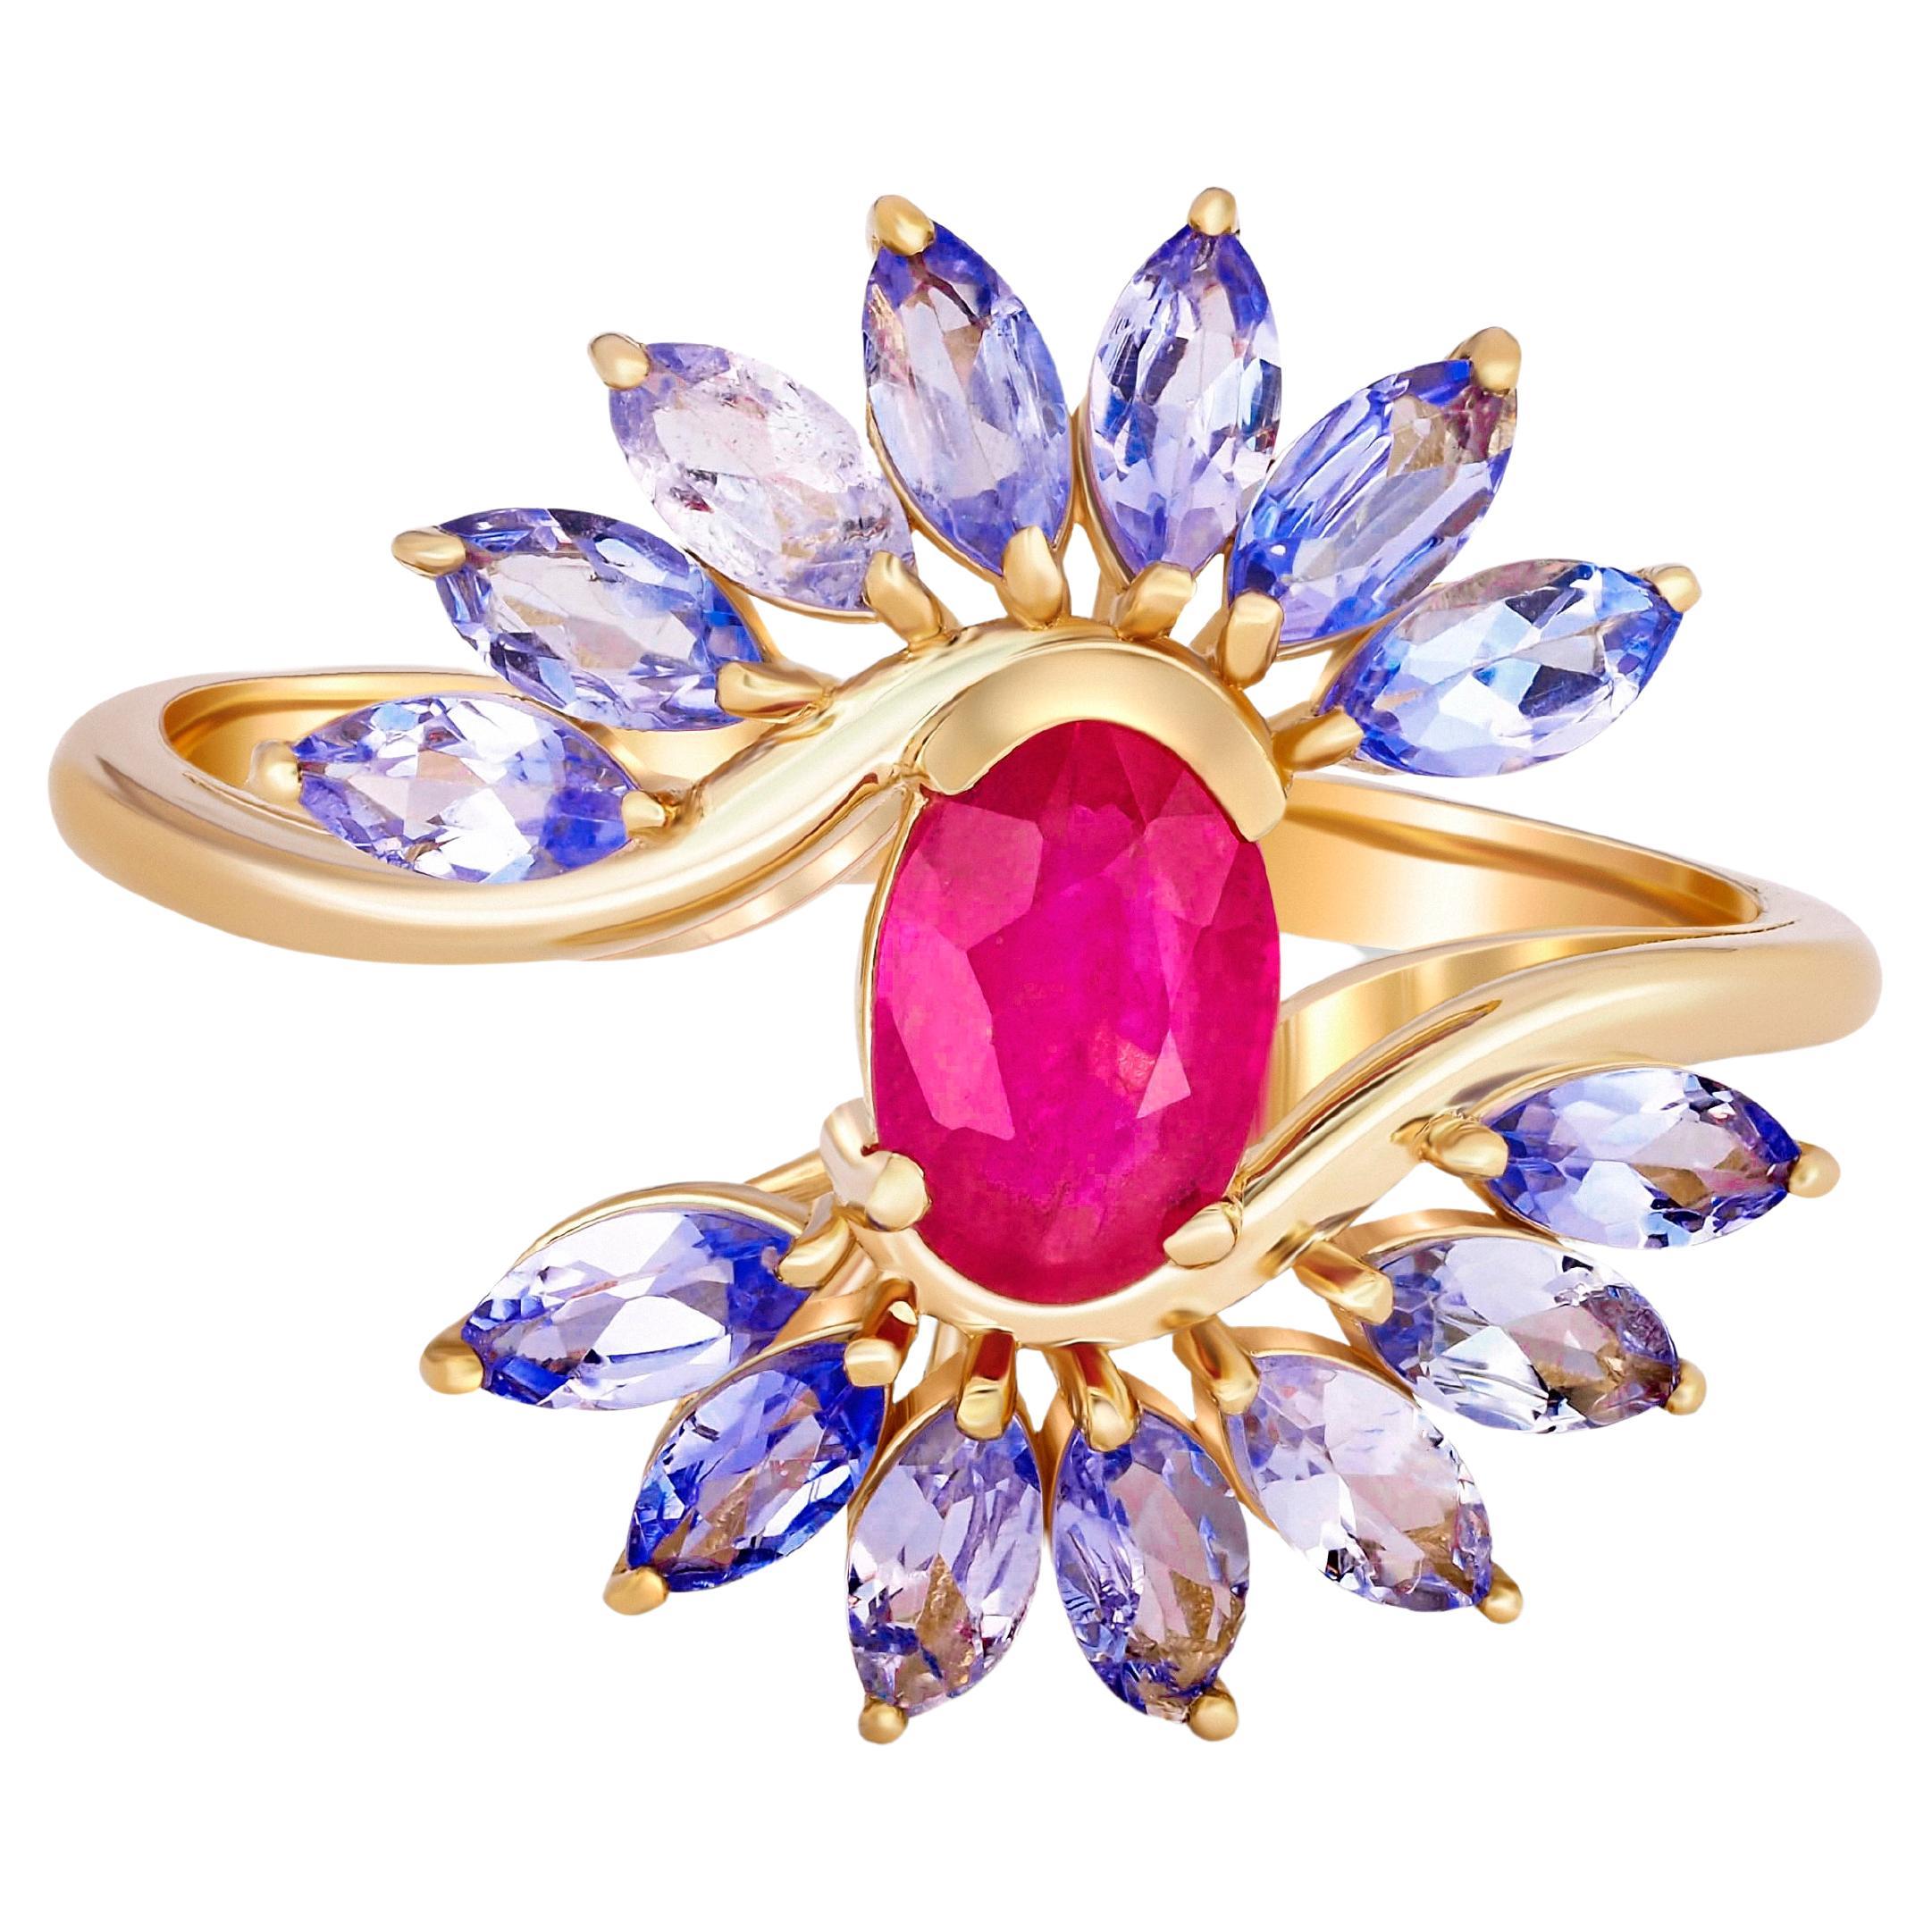 For Sale:  14 karat Gold Ring with Ruby and Tanzanites. Oval ruby ring. Tanzanite ring!